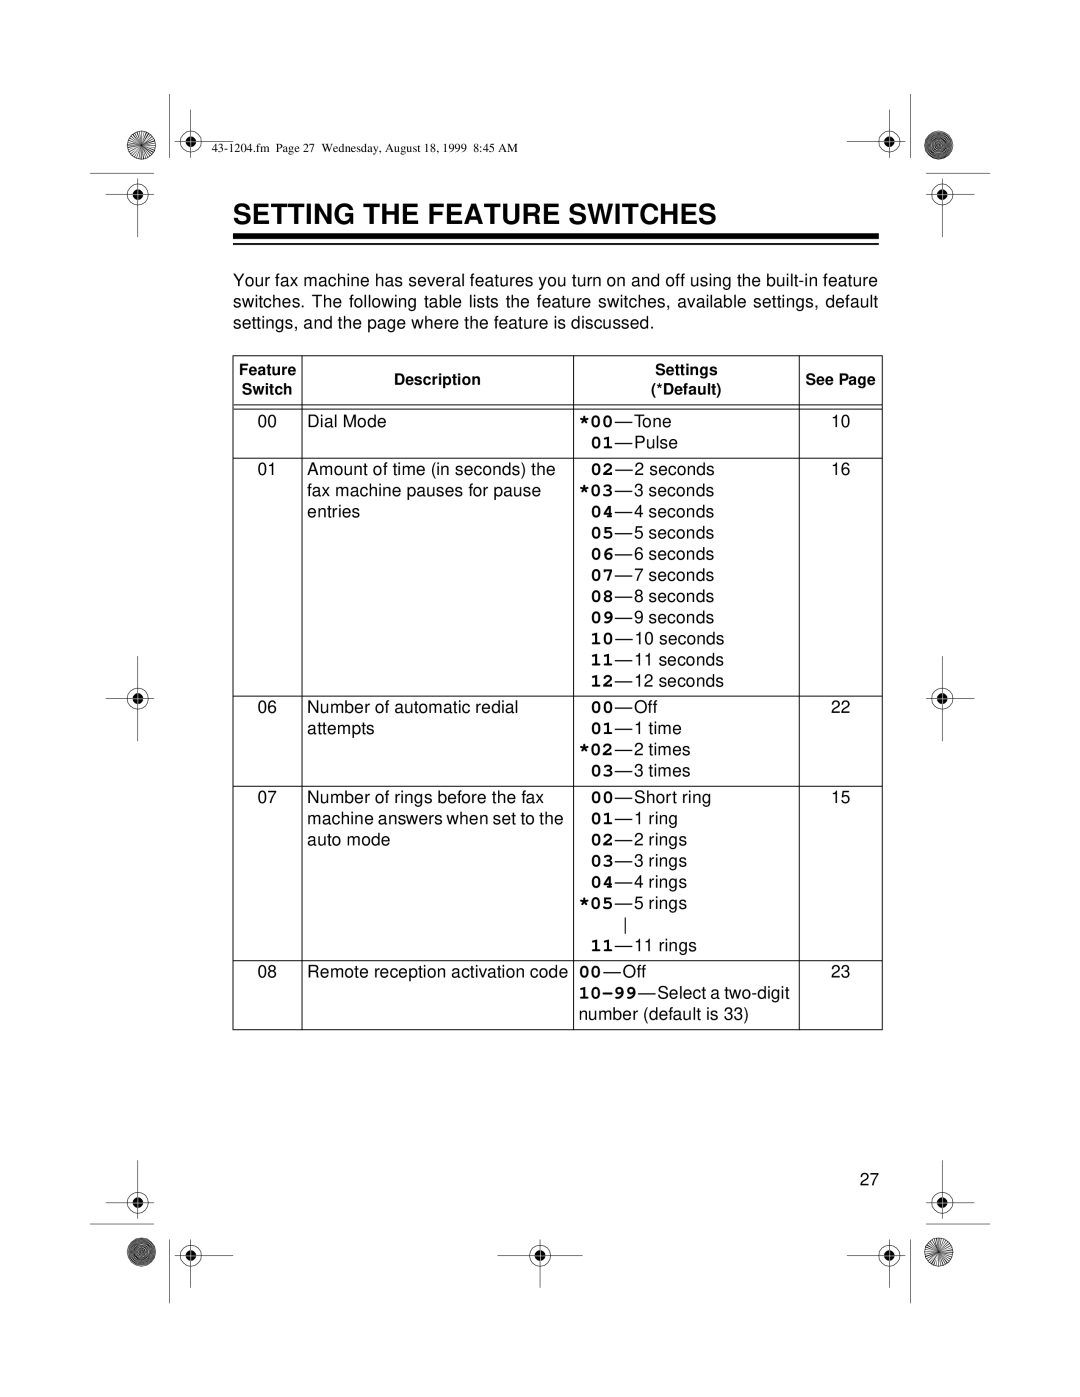 Radio Shack 43-1204 owner manual Setting The Feature Switches, Description, Settings, See Page, Default 